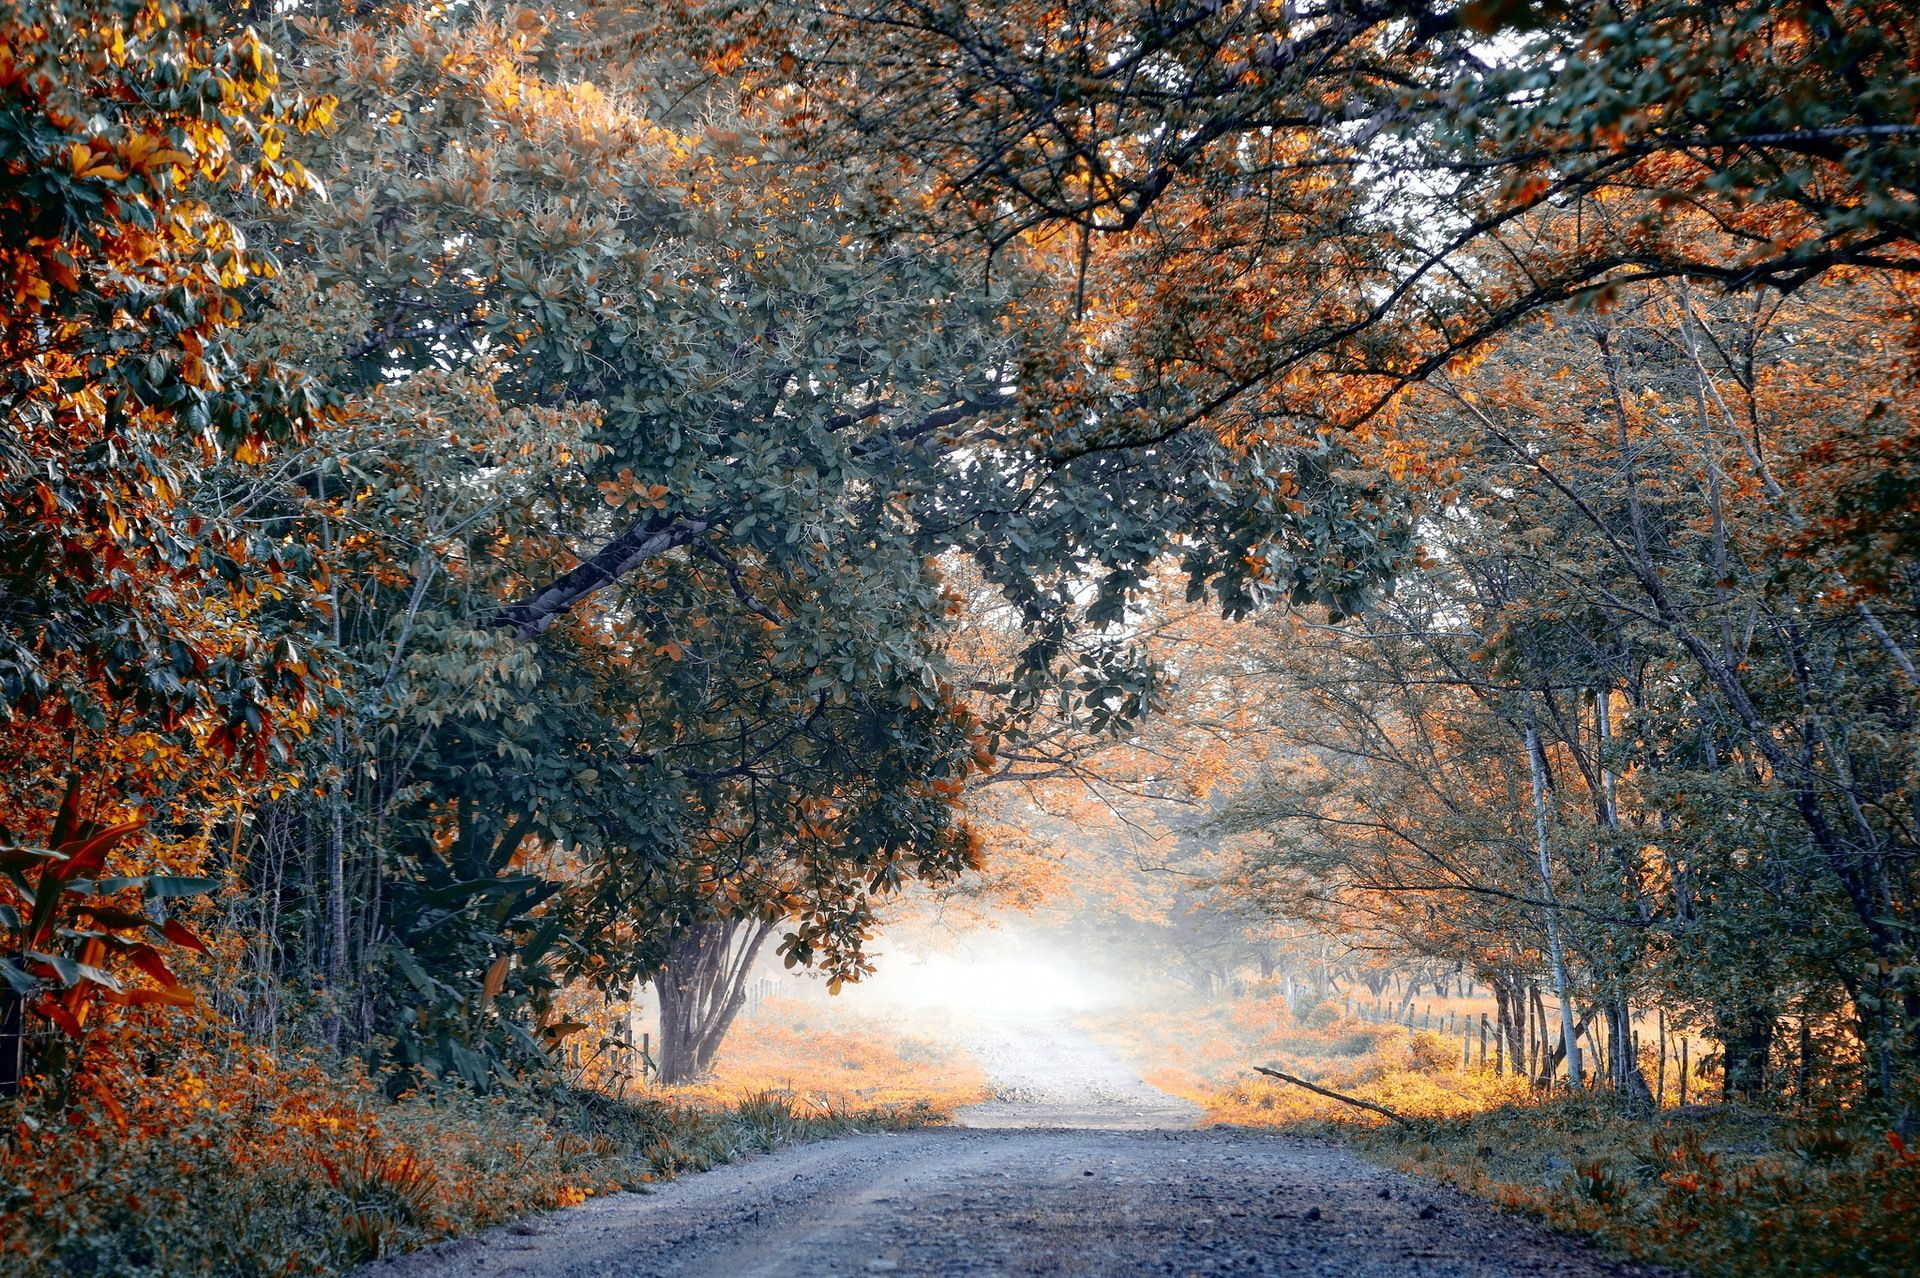 World roads lane street path nature landscapes trees forest fall autumn seasons leaves wallpaperx1278